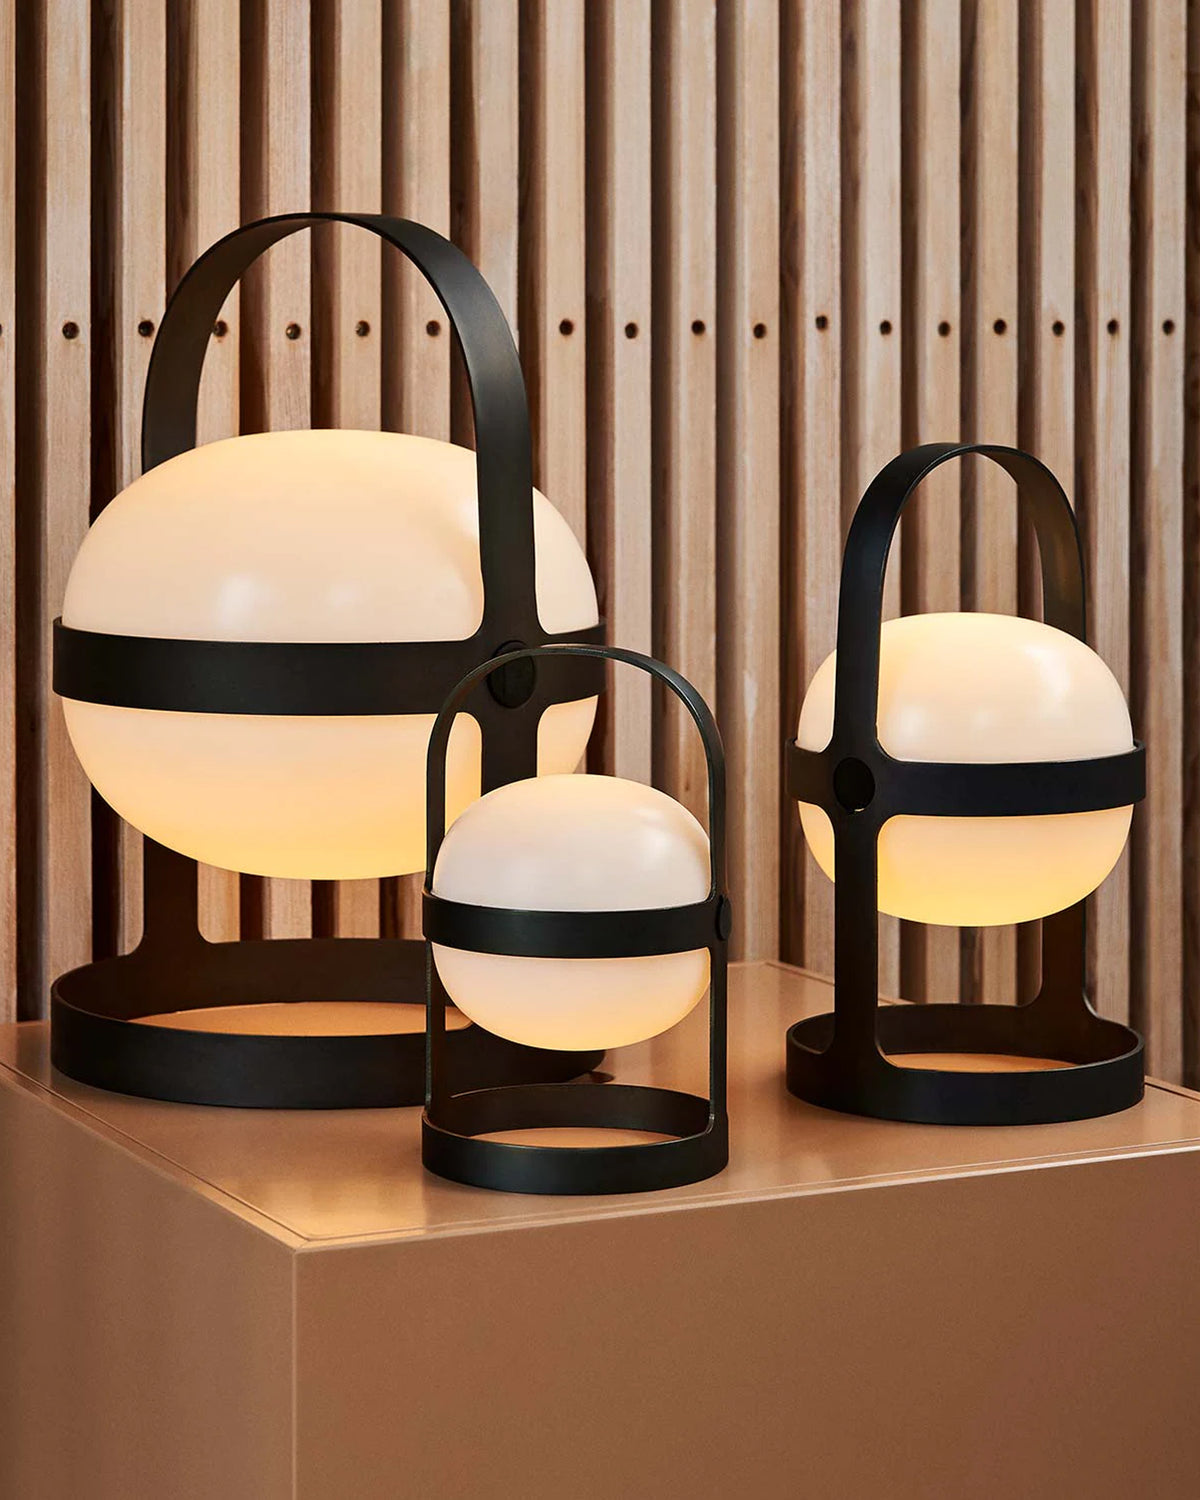 Create a cosy atmosphere for kids indoors or outdoors with this portable lantern. Use it on the verandah, around the pool, in a bookcase or next to your kids bed. The floating, moon shaped ball, is encased in a powder coated metal frame which protects the light and acts as a base and handle. The lamp can be charged with either USB or solar energy.